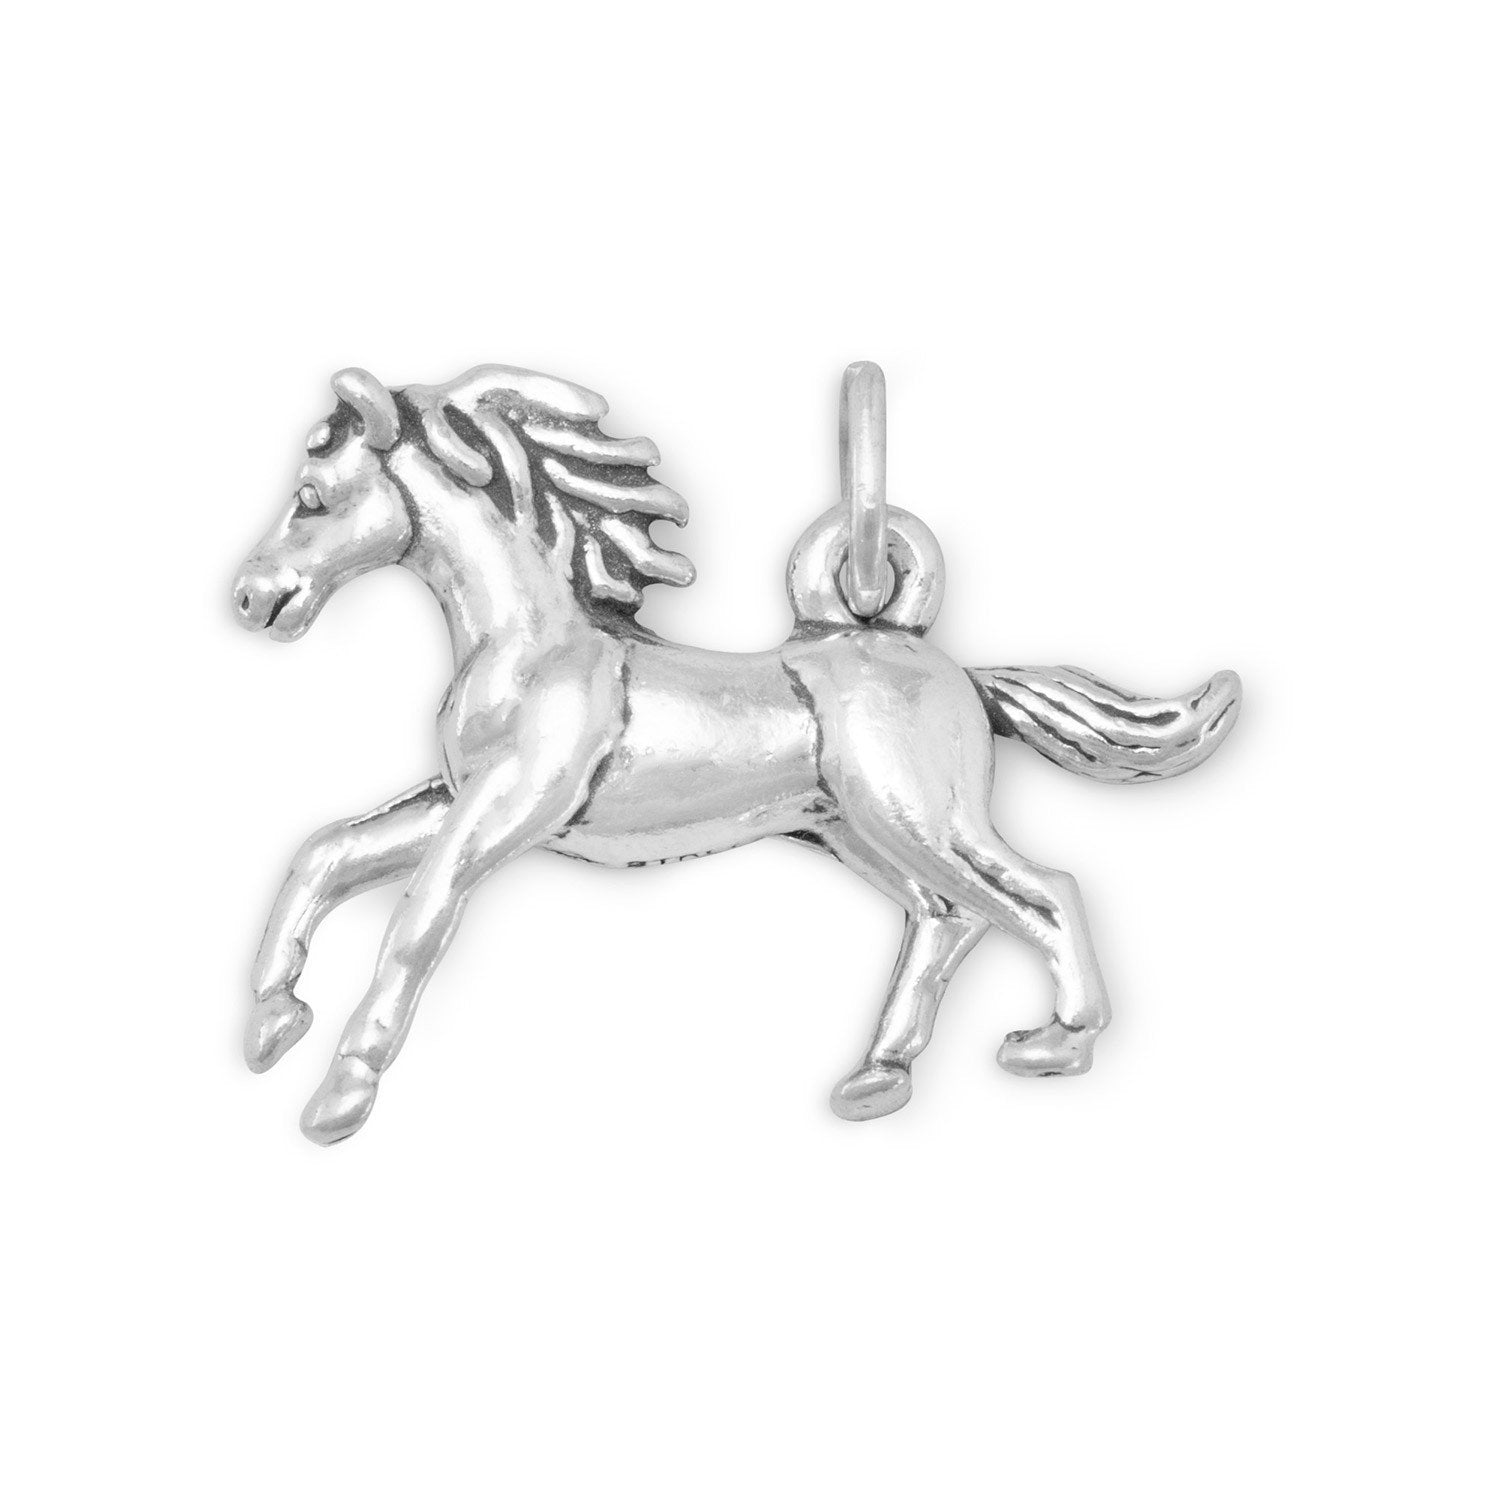 Galloping Horse Charm